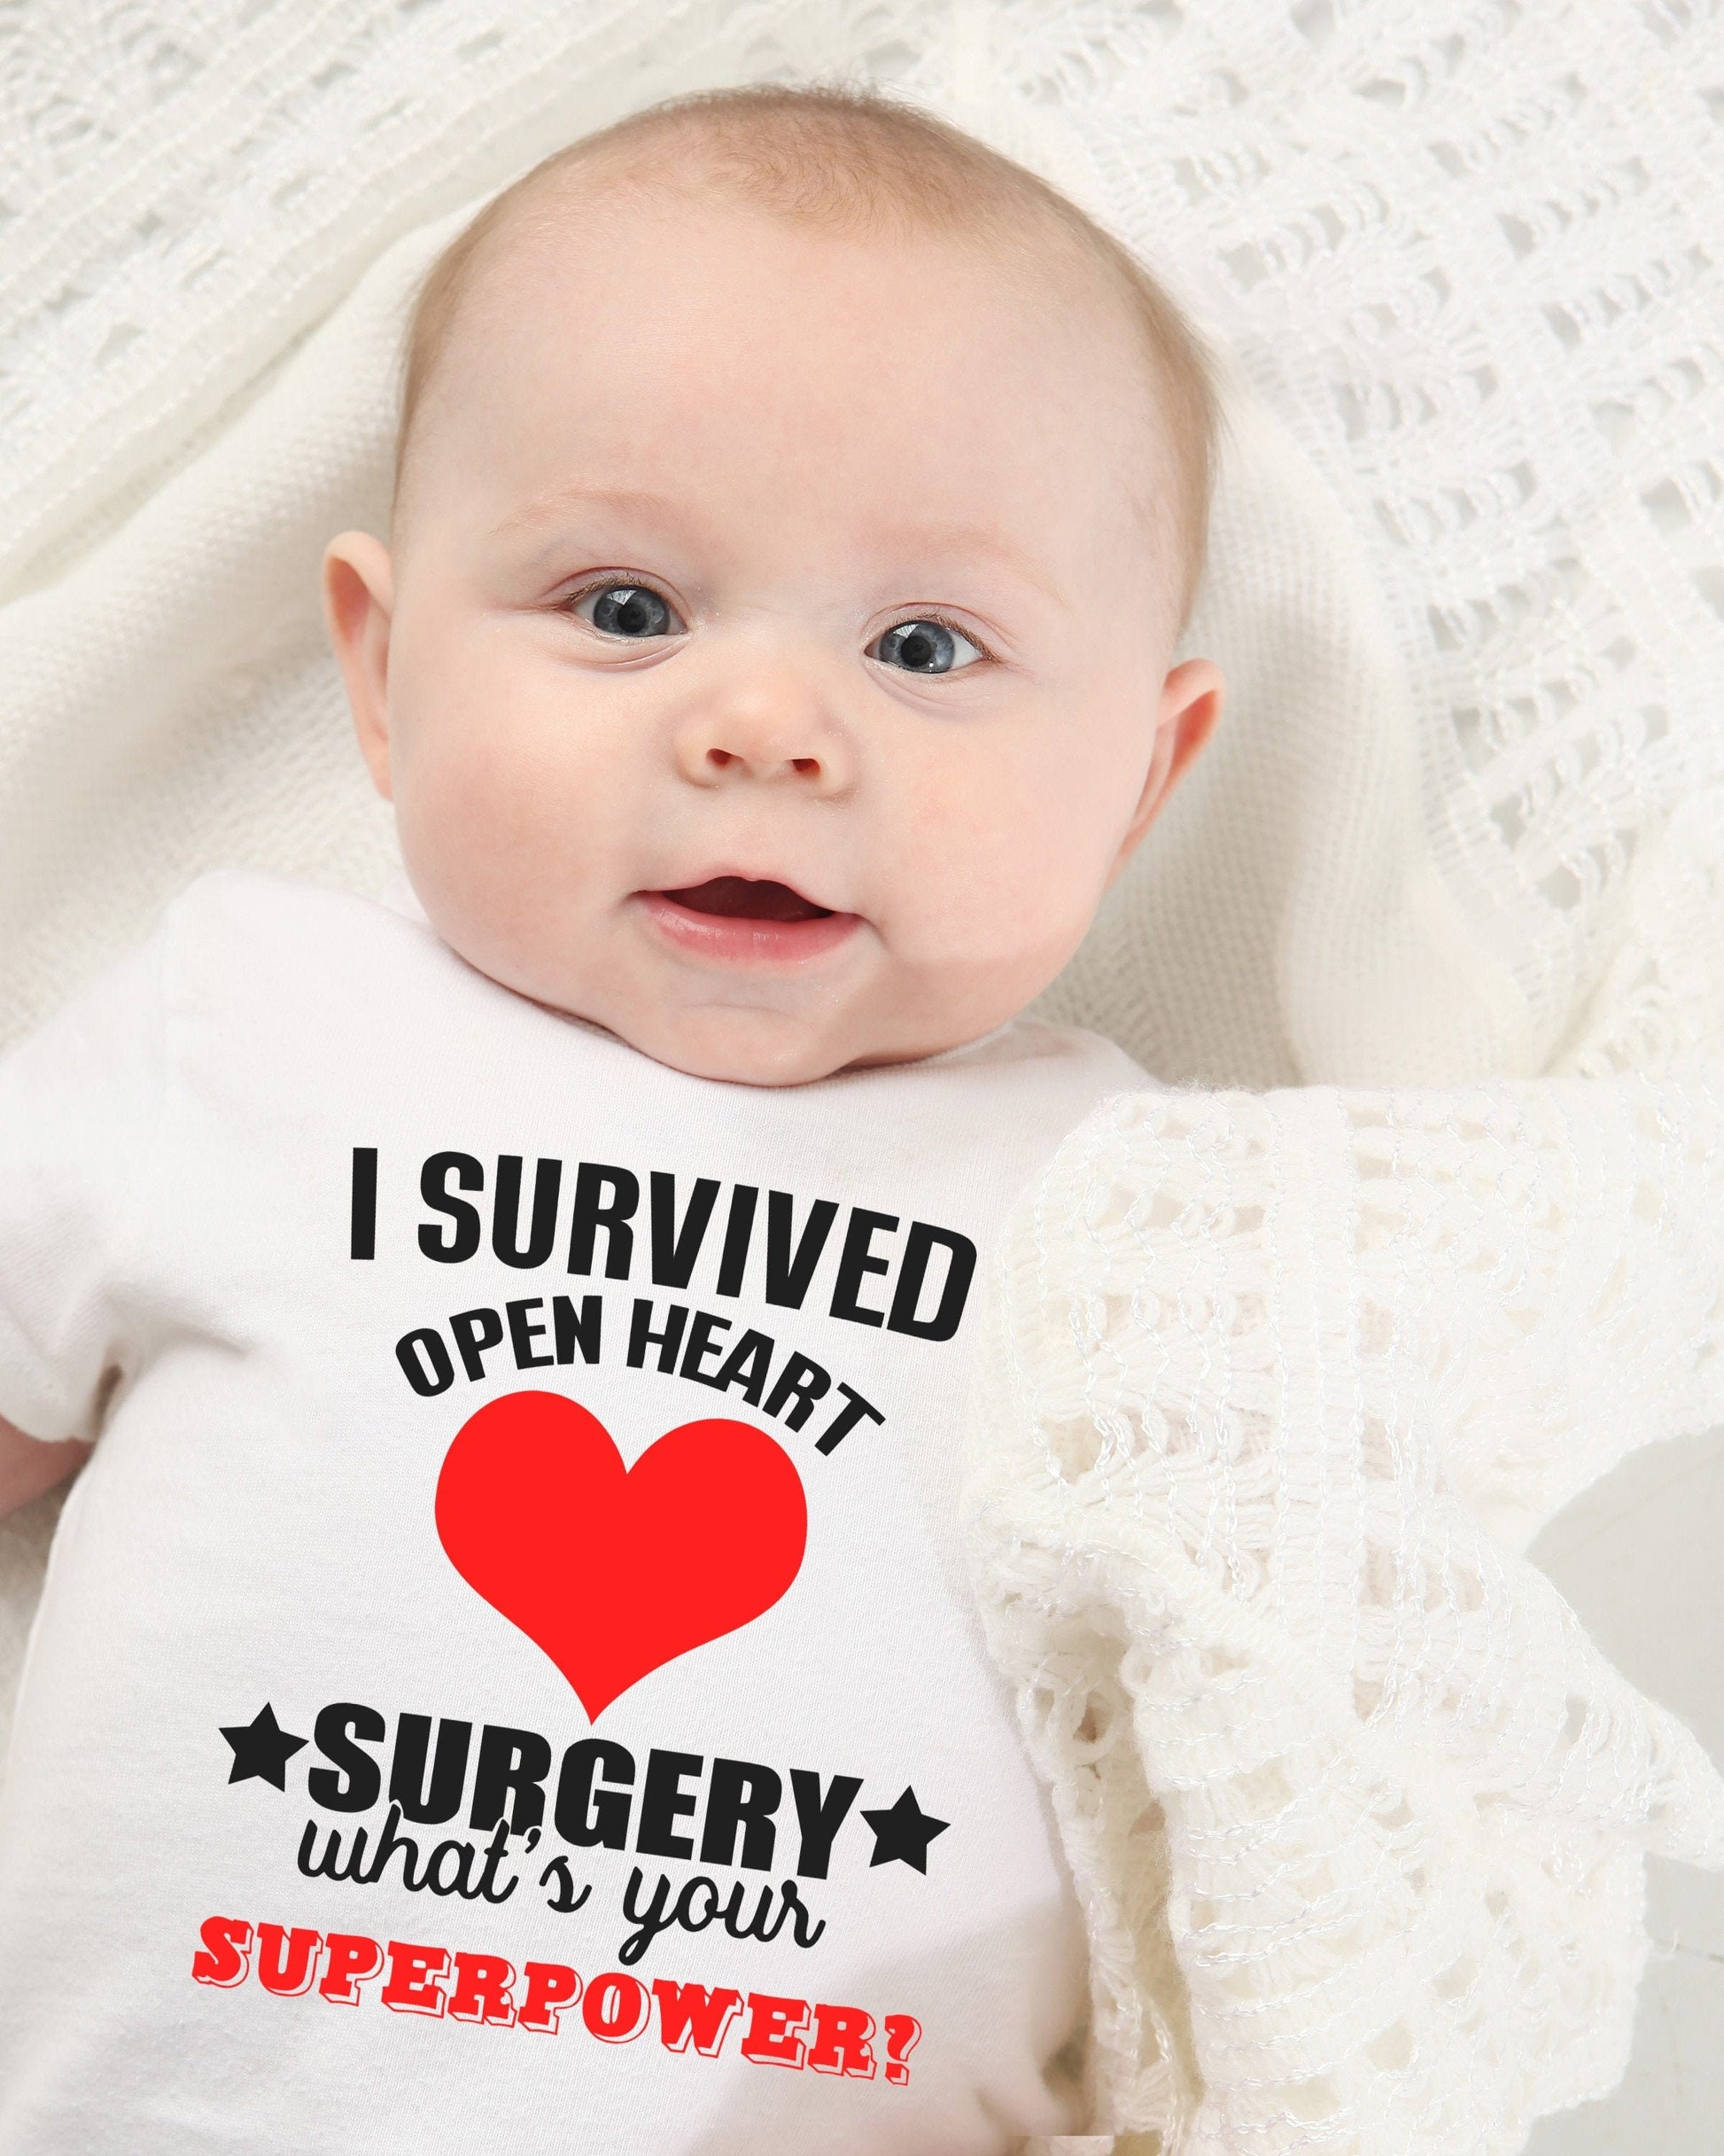 I Survived Open Heart Surgery Infant or Youth Shirt or Bodysuit - CHD Baby Gift - Heart Warrior - Heart Defect Gift - Heart Surgery Gift